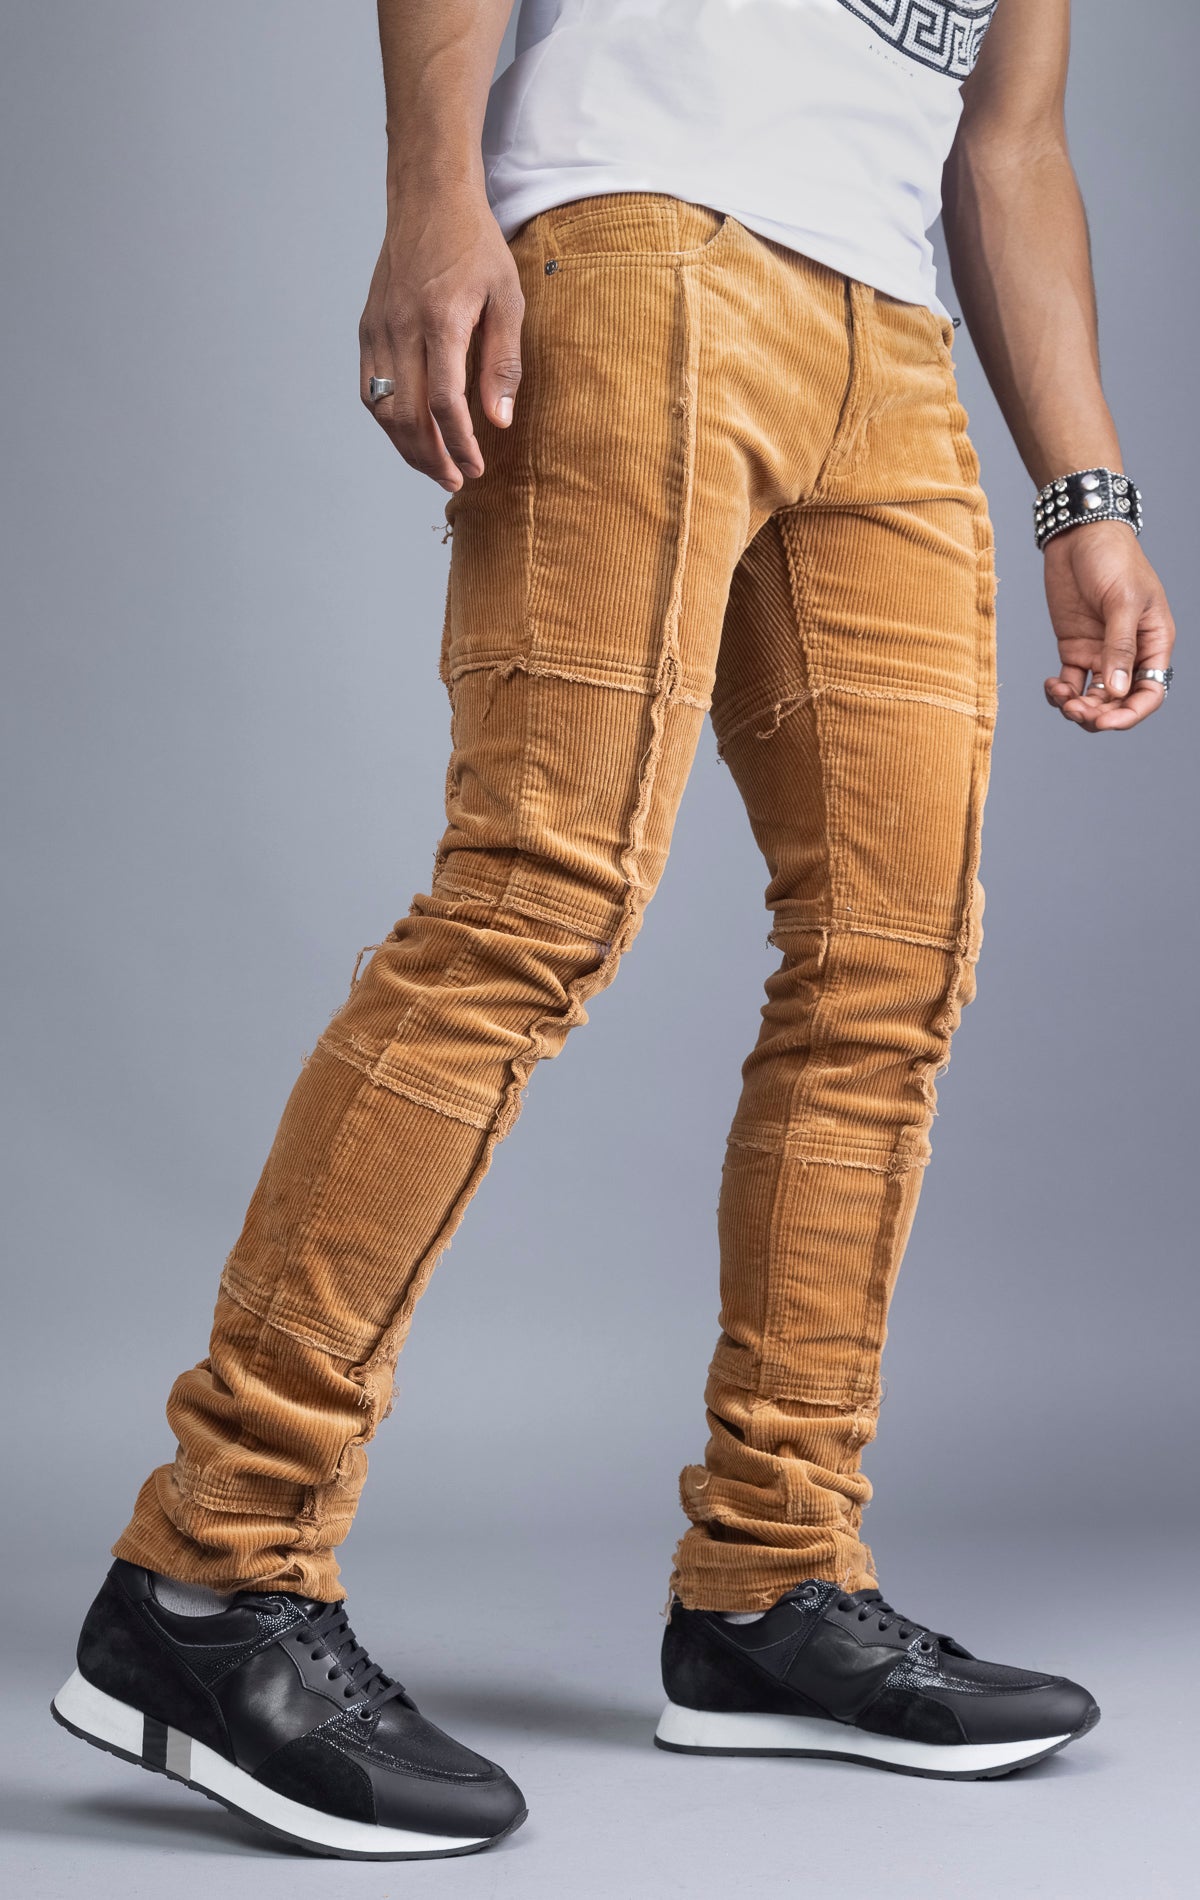 Men's camel corduroy pants with stacked legs, cut-and-sew details, and raw hems.